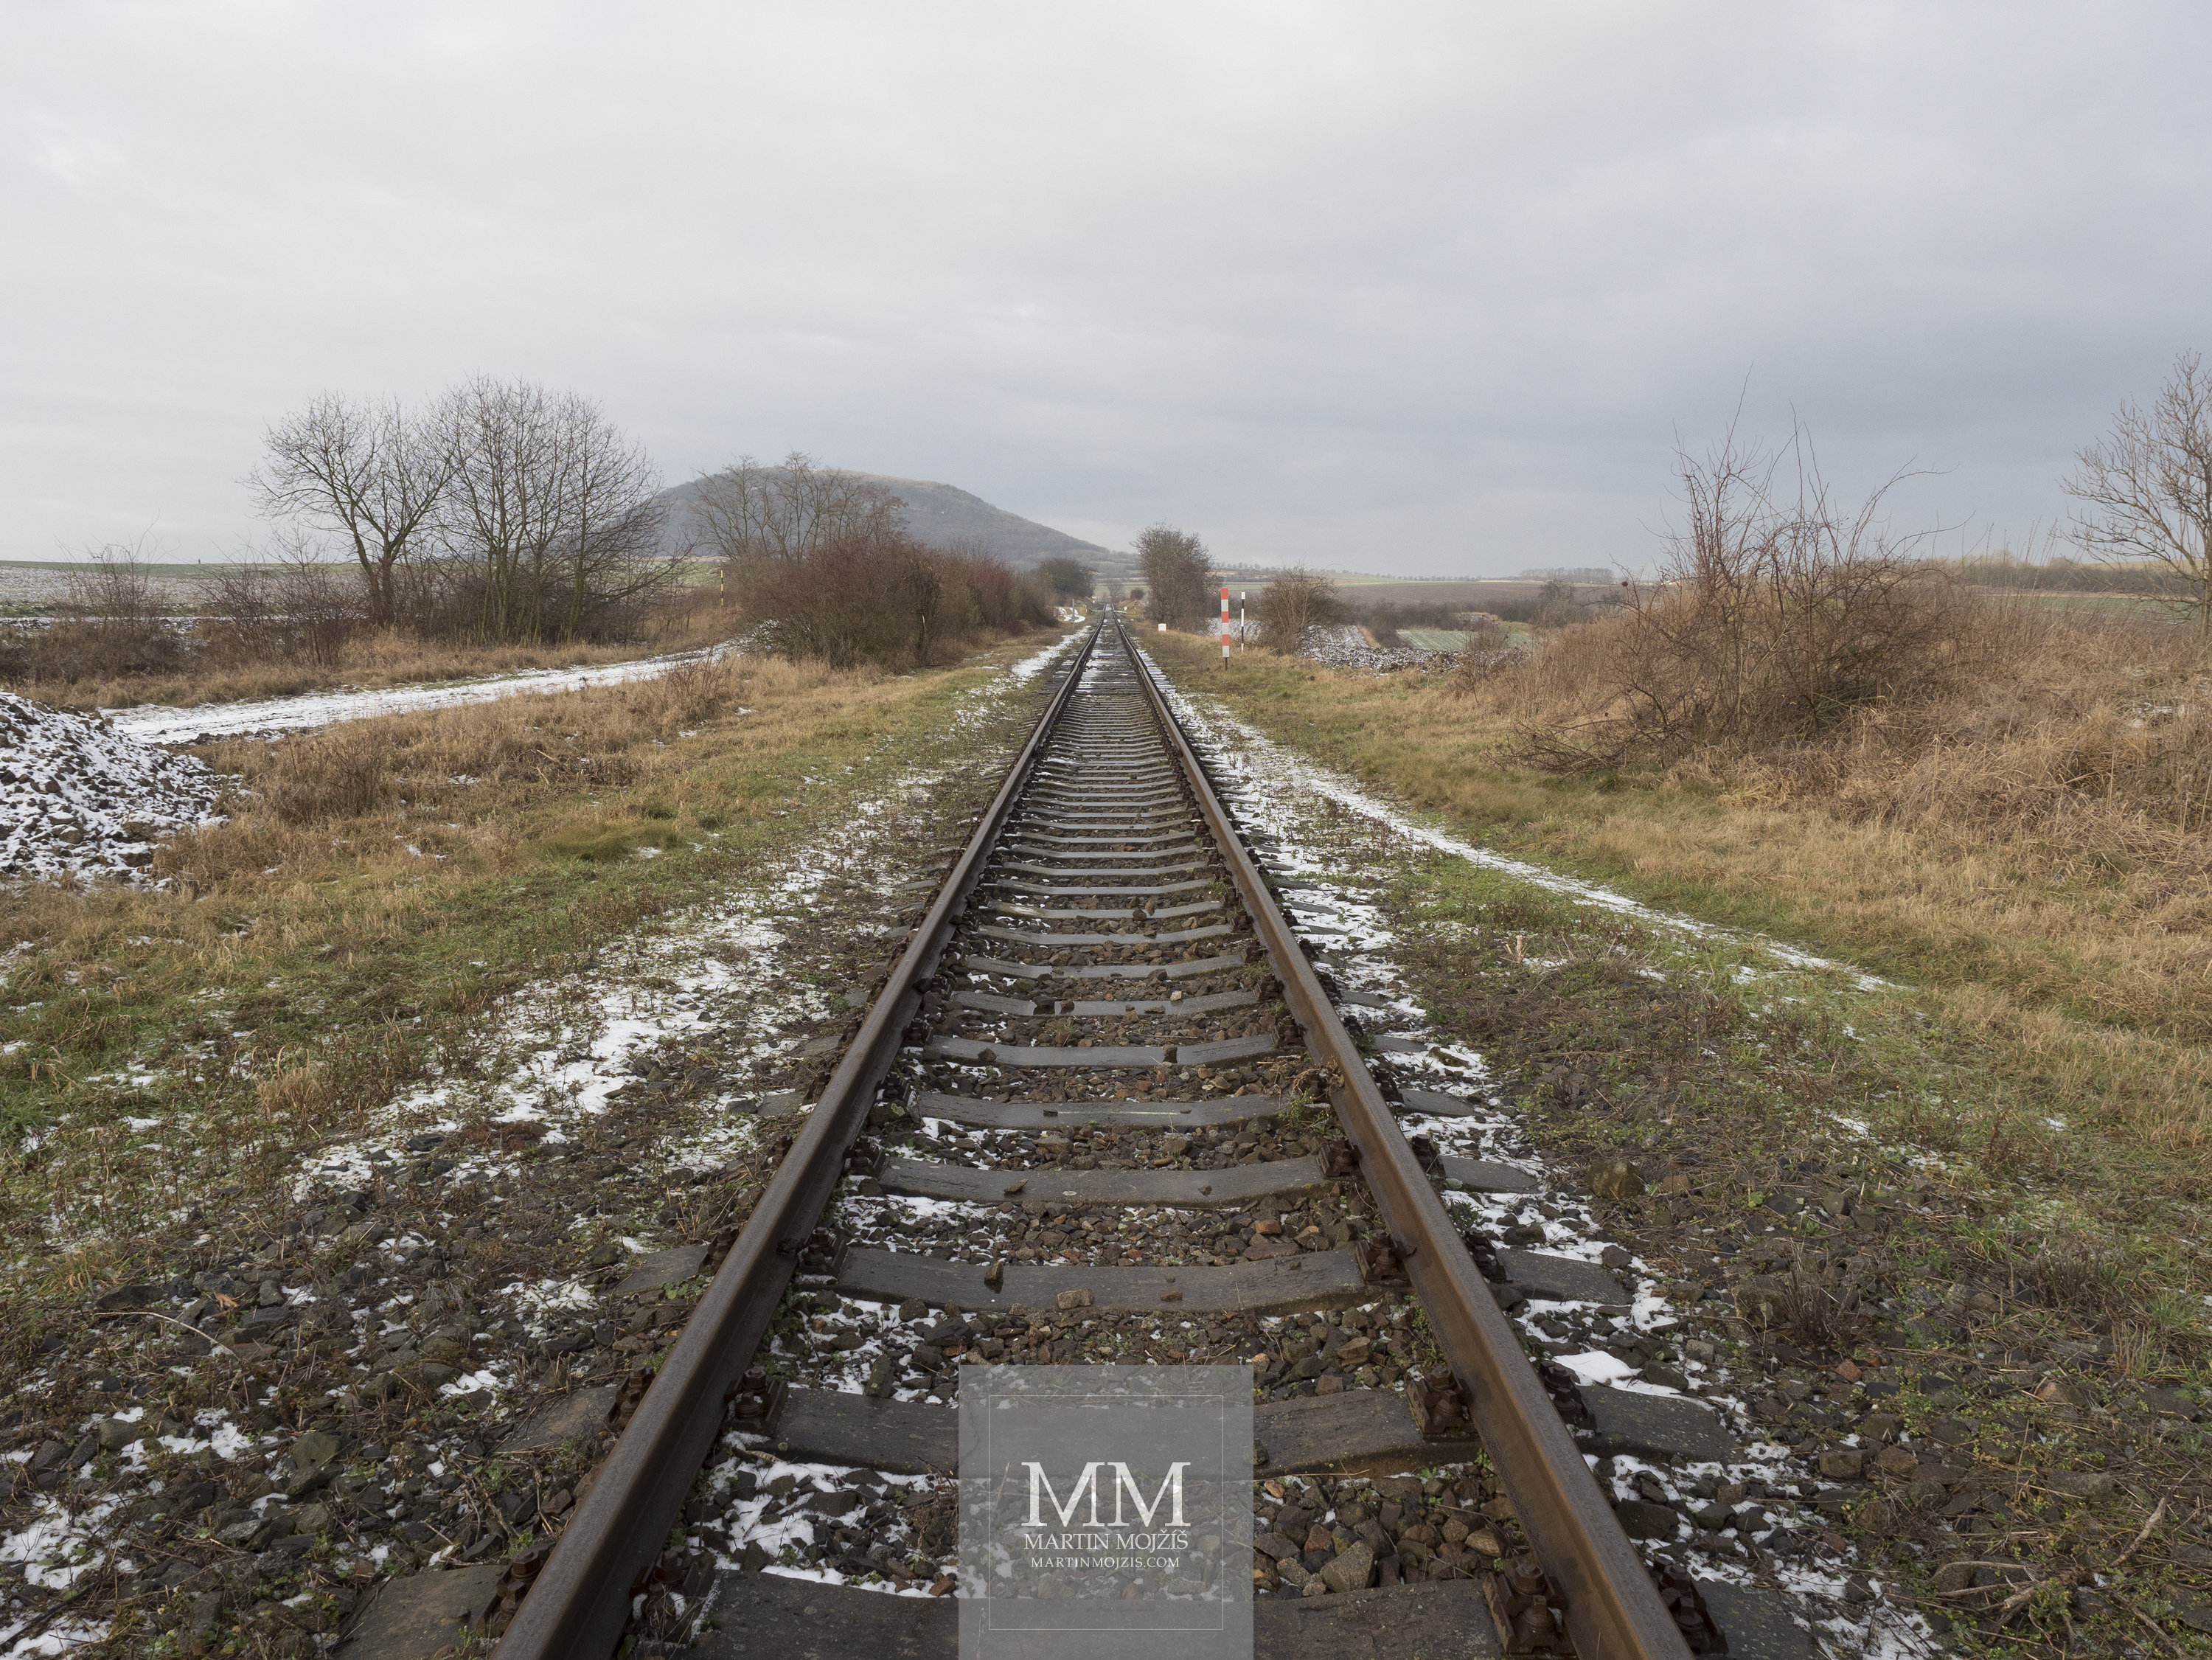 Railway track near Rip mountain in winter. Photograph created with the Olympus OM-D E-M1 Mark II photographic camera.